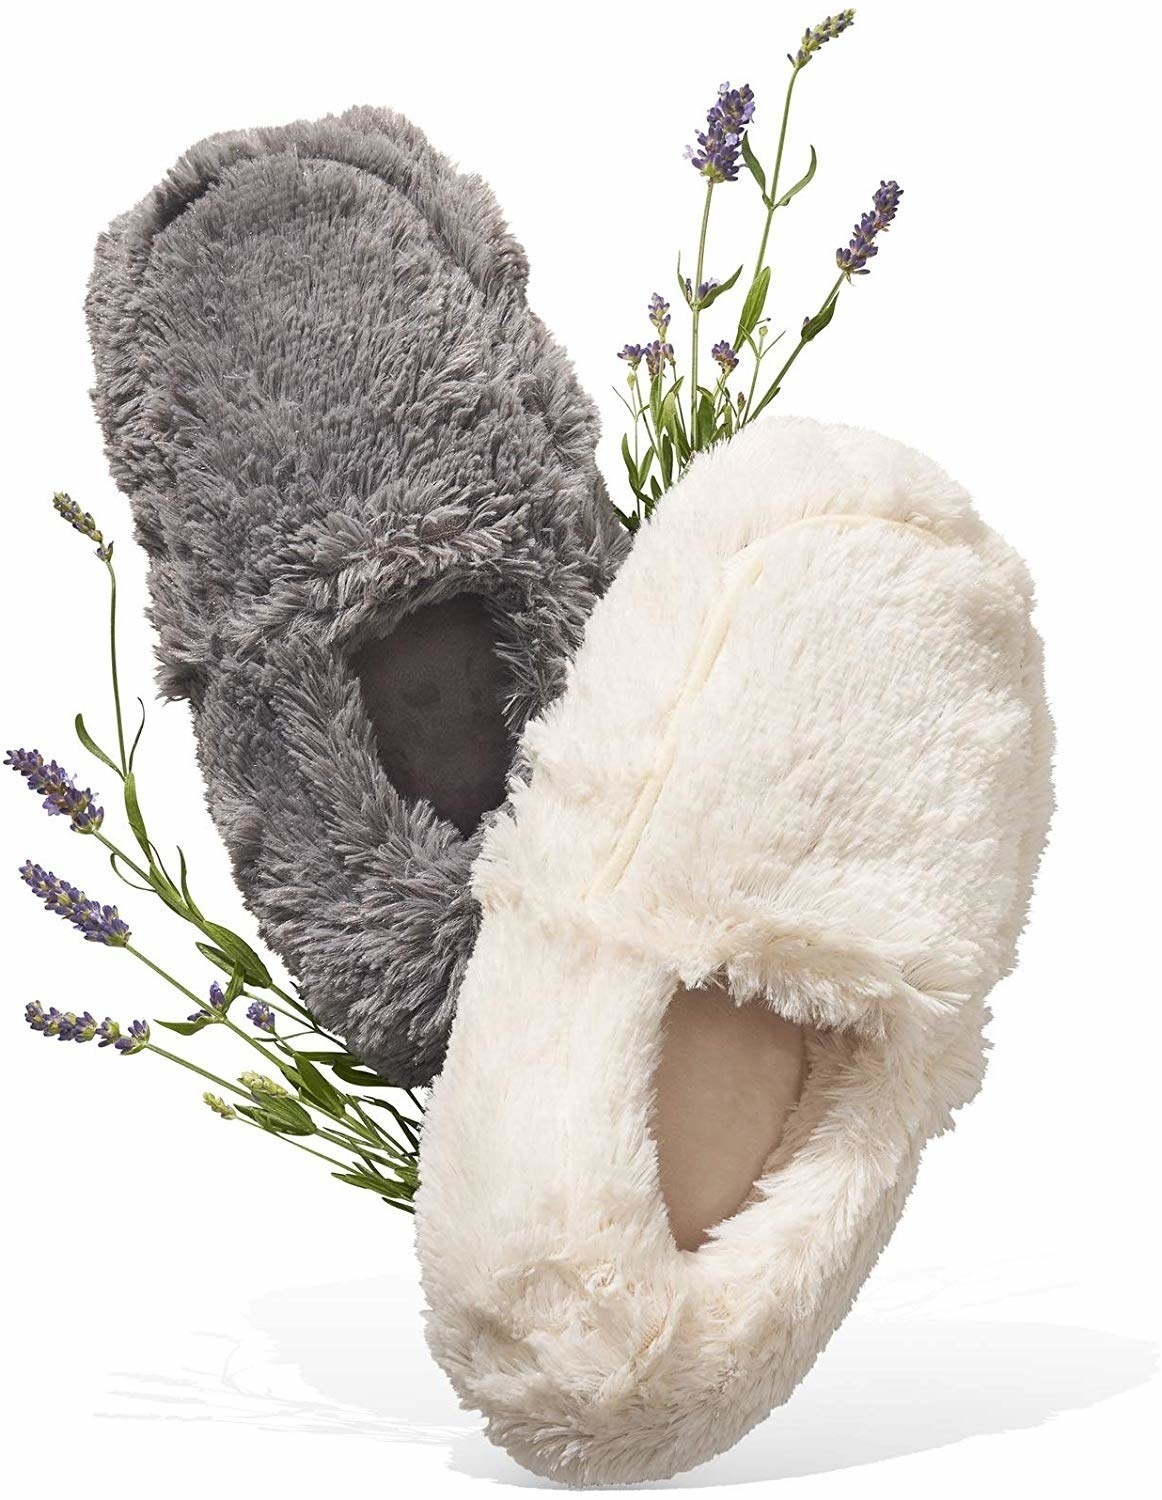 The slippers in white and grey